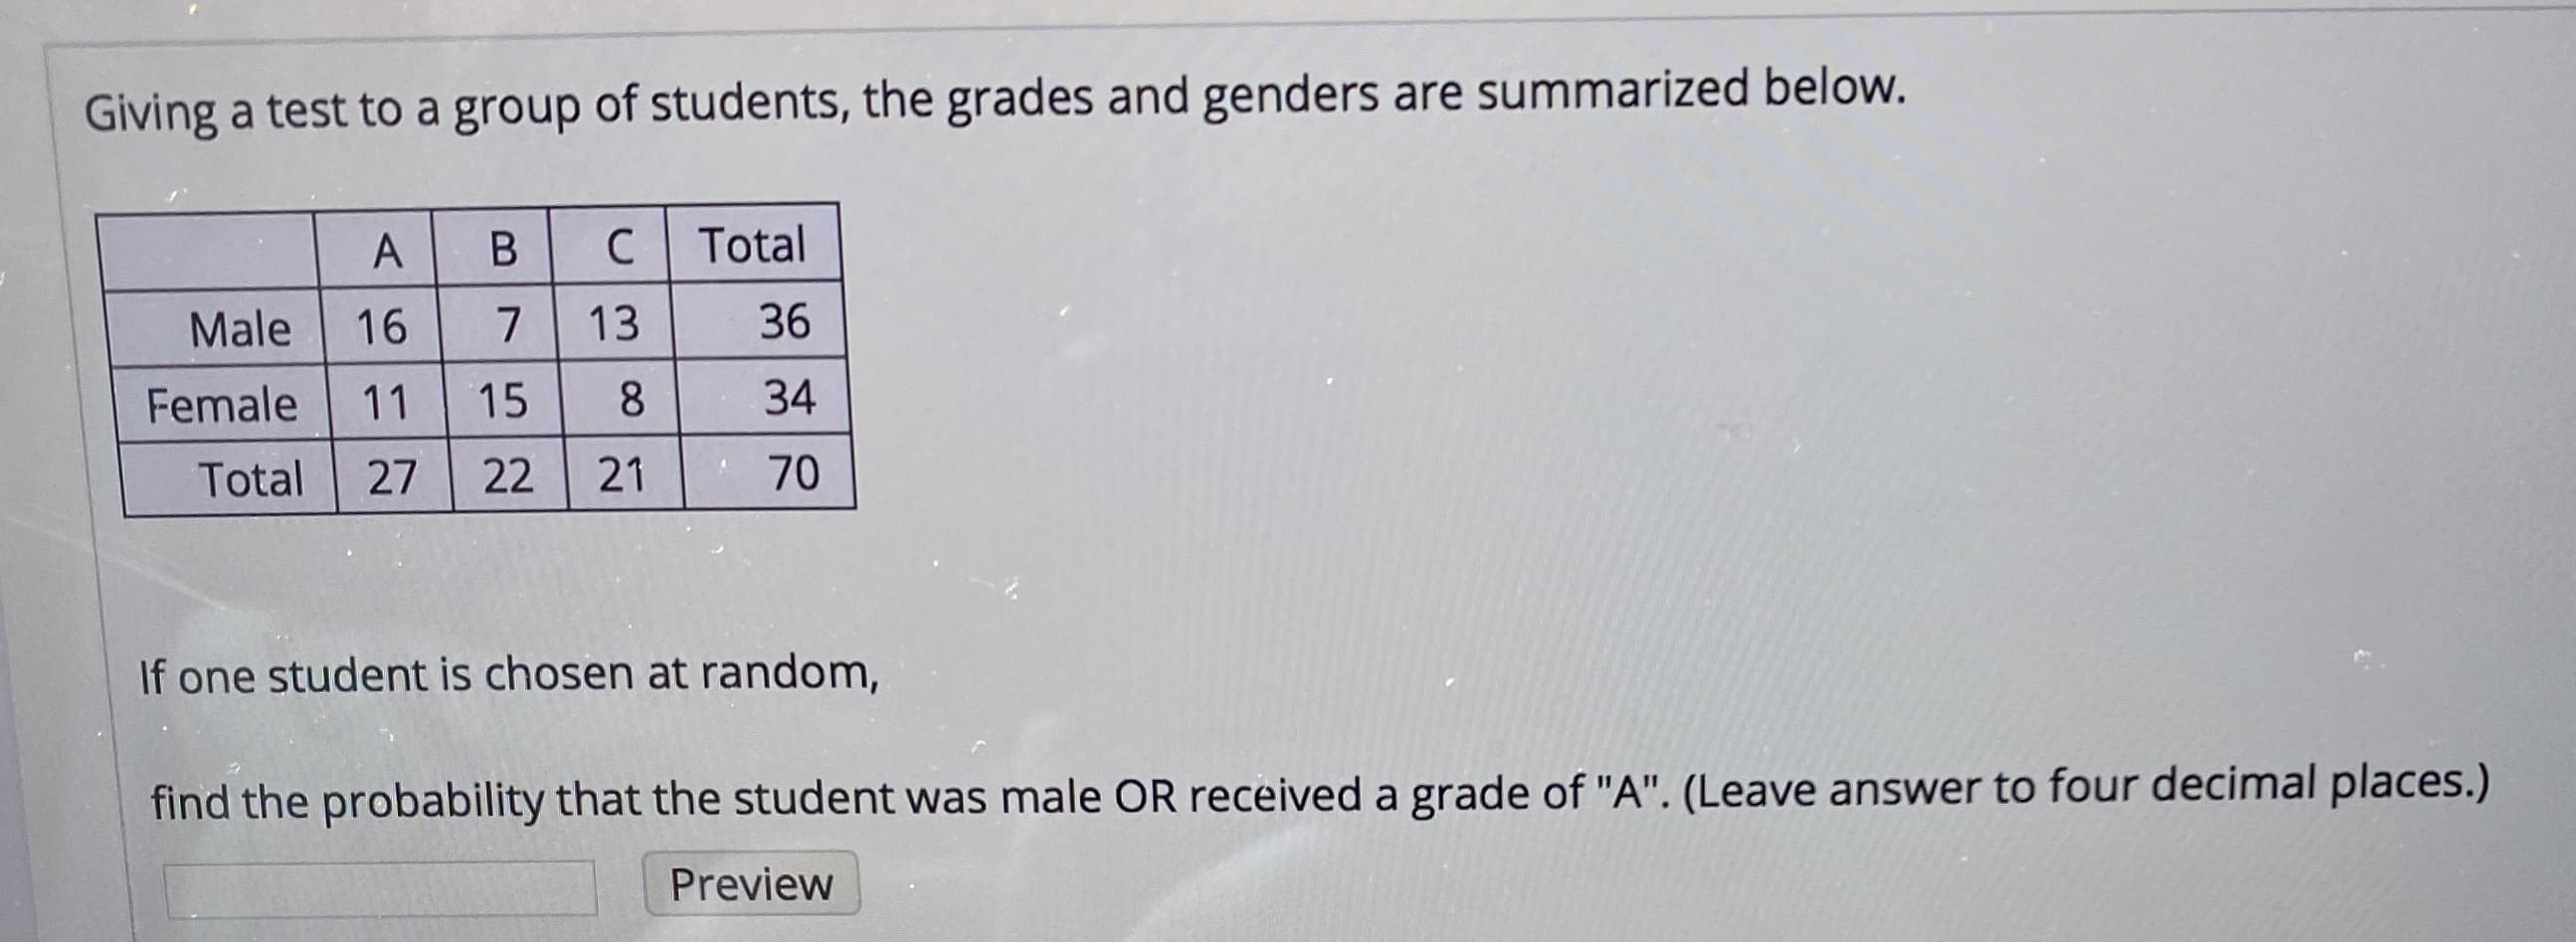 Giving a test to a group of students, the grades and genders are summarized below.
Total
Male
16
13
36
Female
11
15
34
Total
27
22
21
70
If one student is chosen at random,
find the probability that the student was male OR received a grade of "A". (Leave answer to four decimal places.)
Preview
